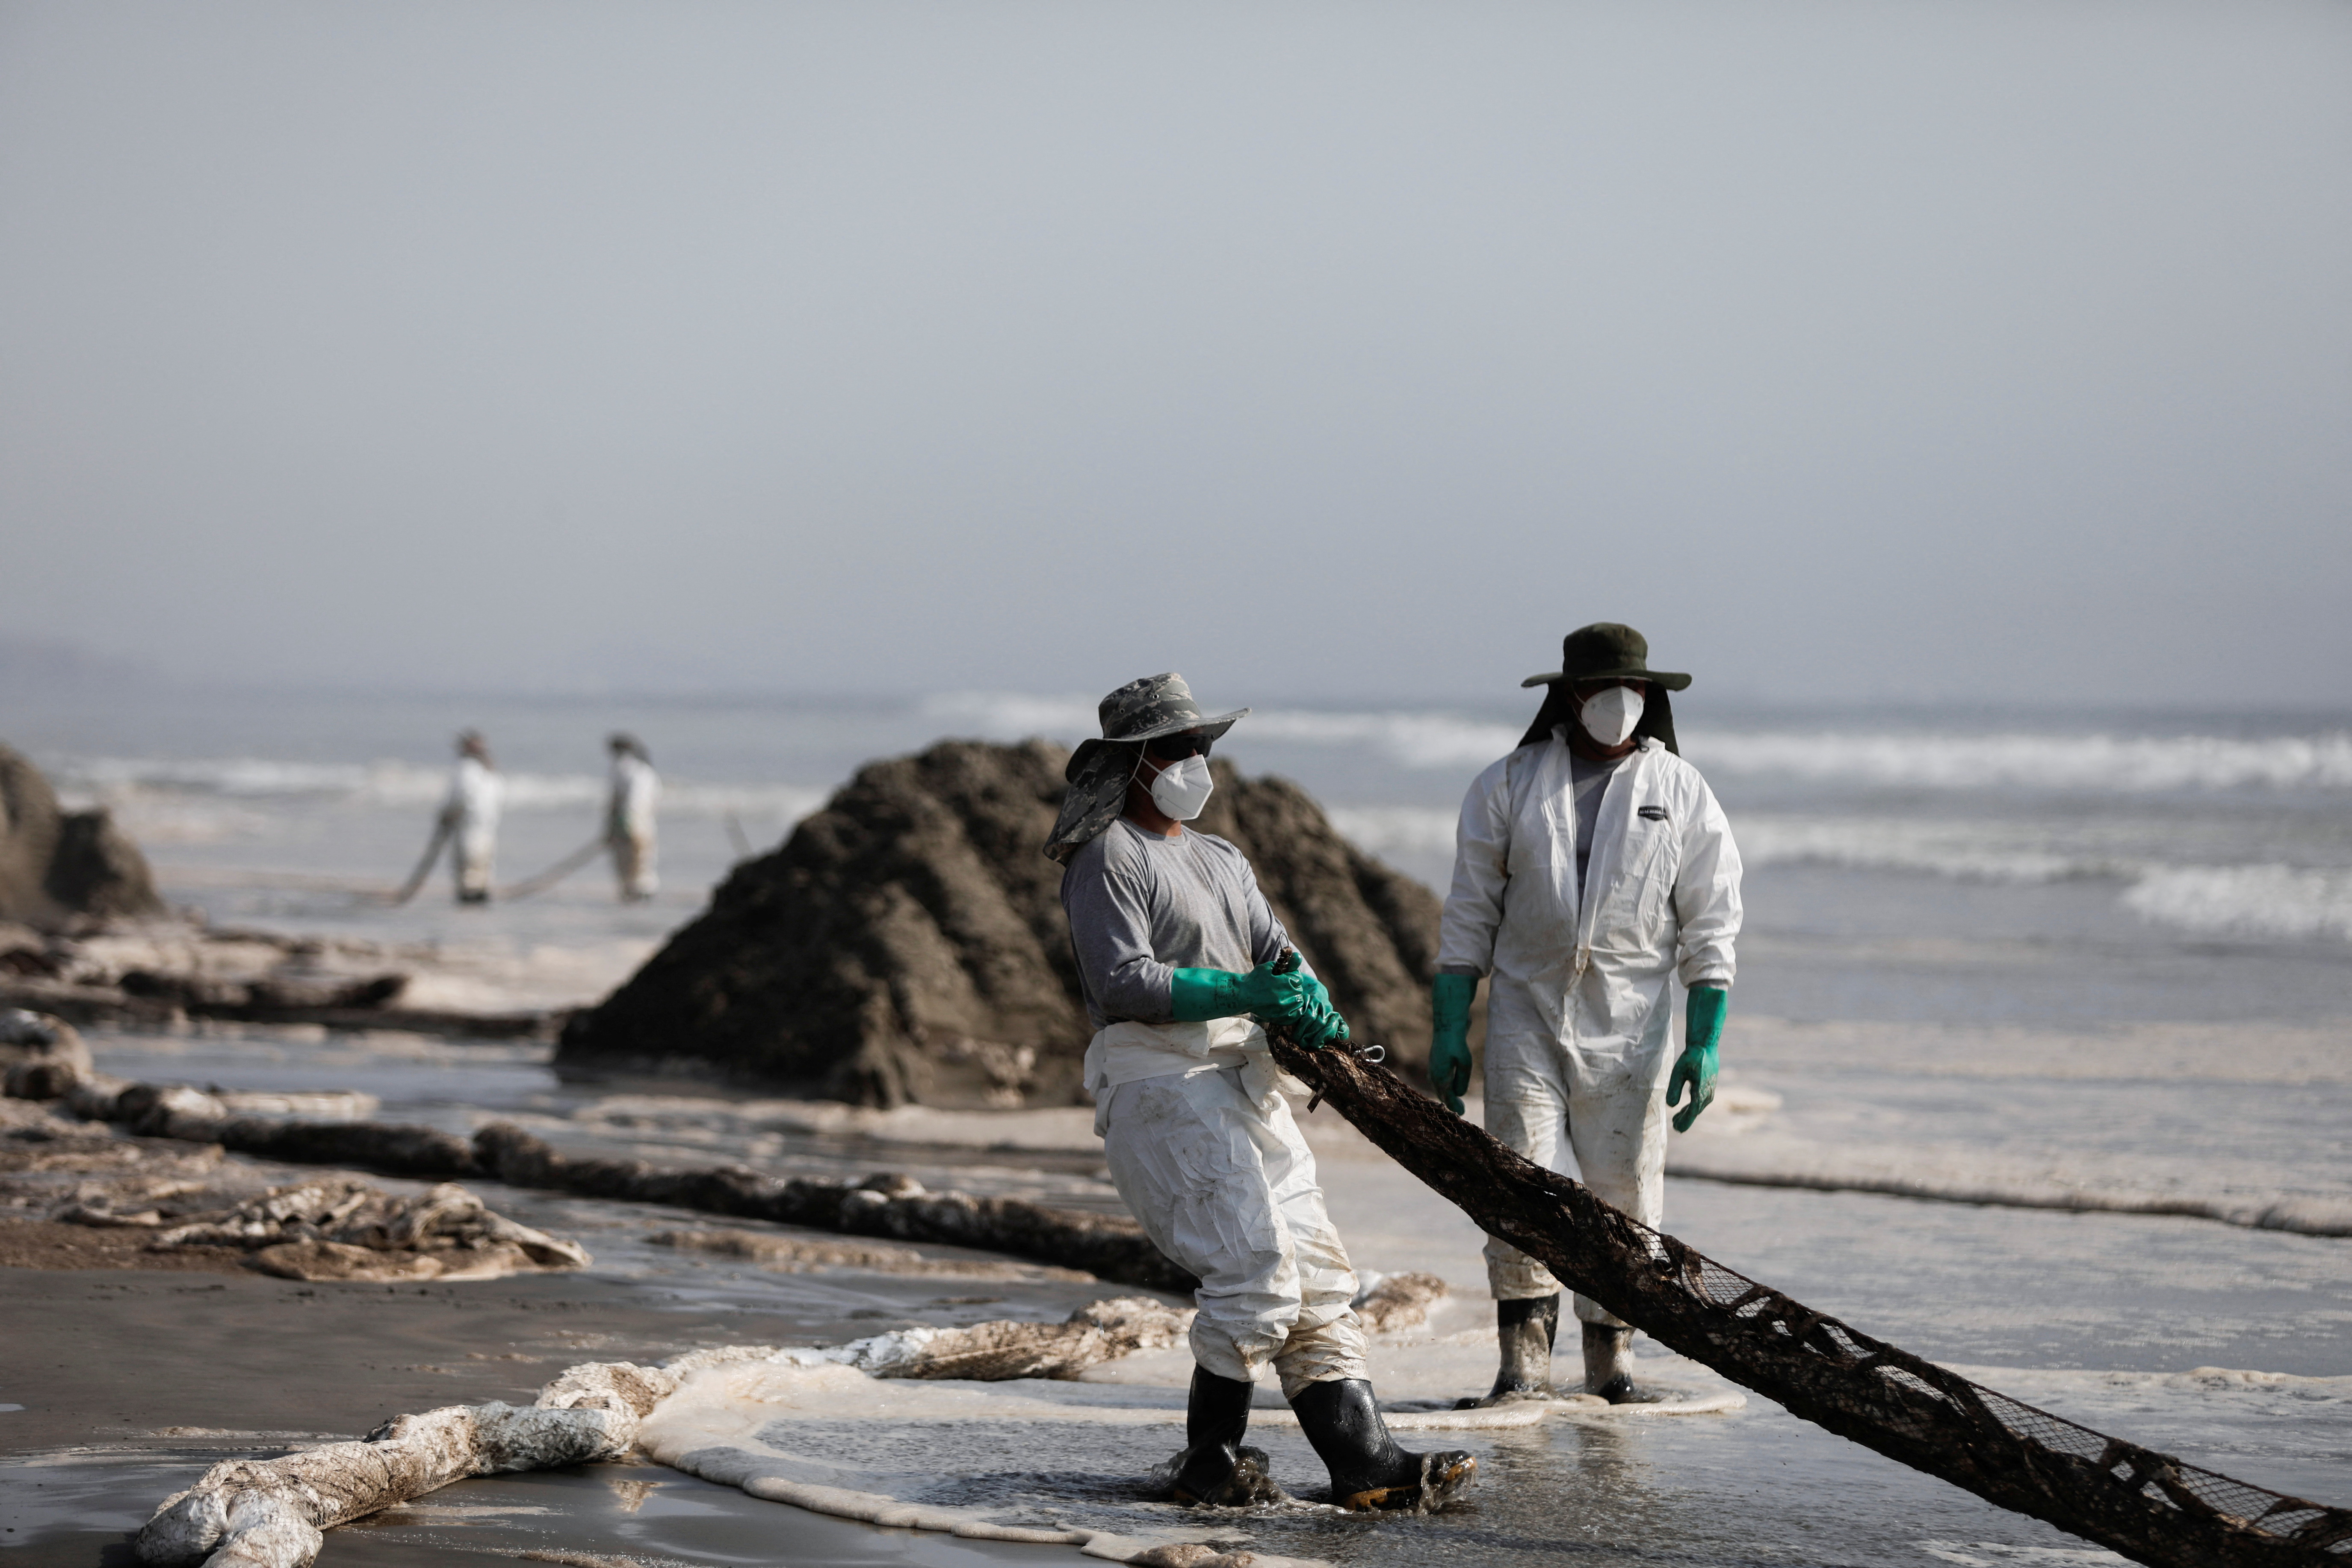 Workers clean an oil spill caused by abnormal waves, triggered by a massive underwater volcanic eruption in Tonga, off the coast of Lima, in Ventanilla, Peru January 19, 2022. REUTERS/Angela Ponce